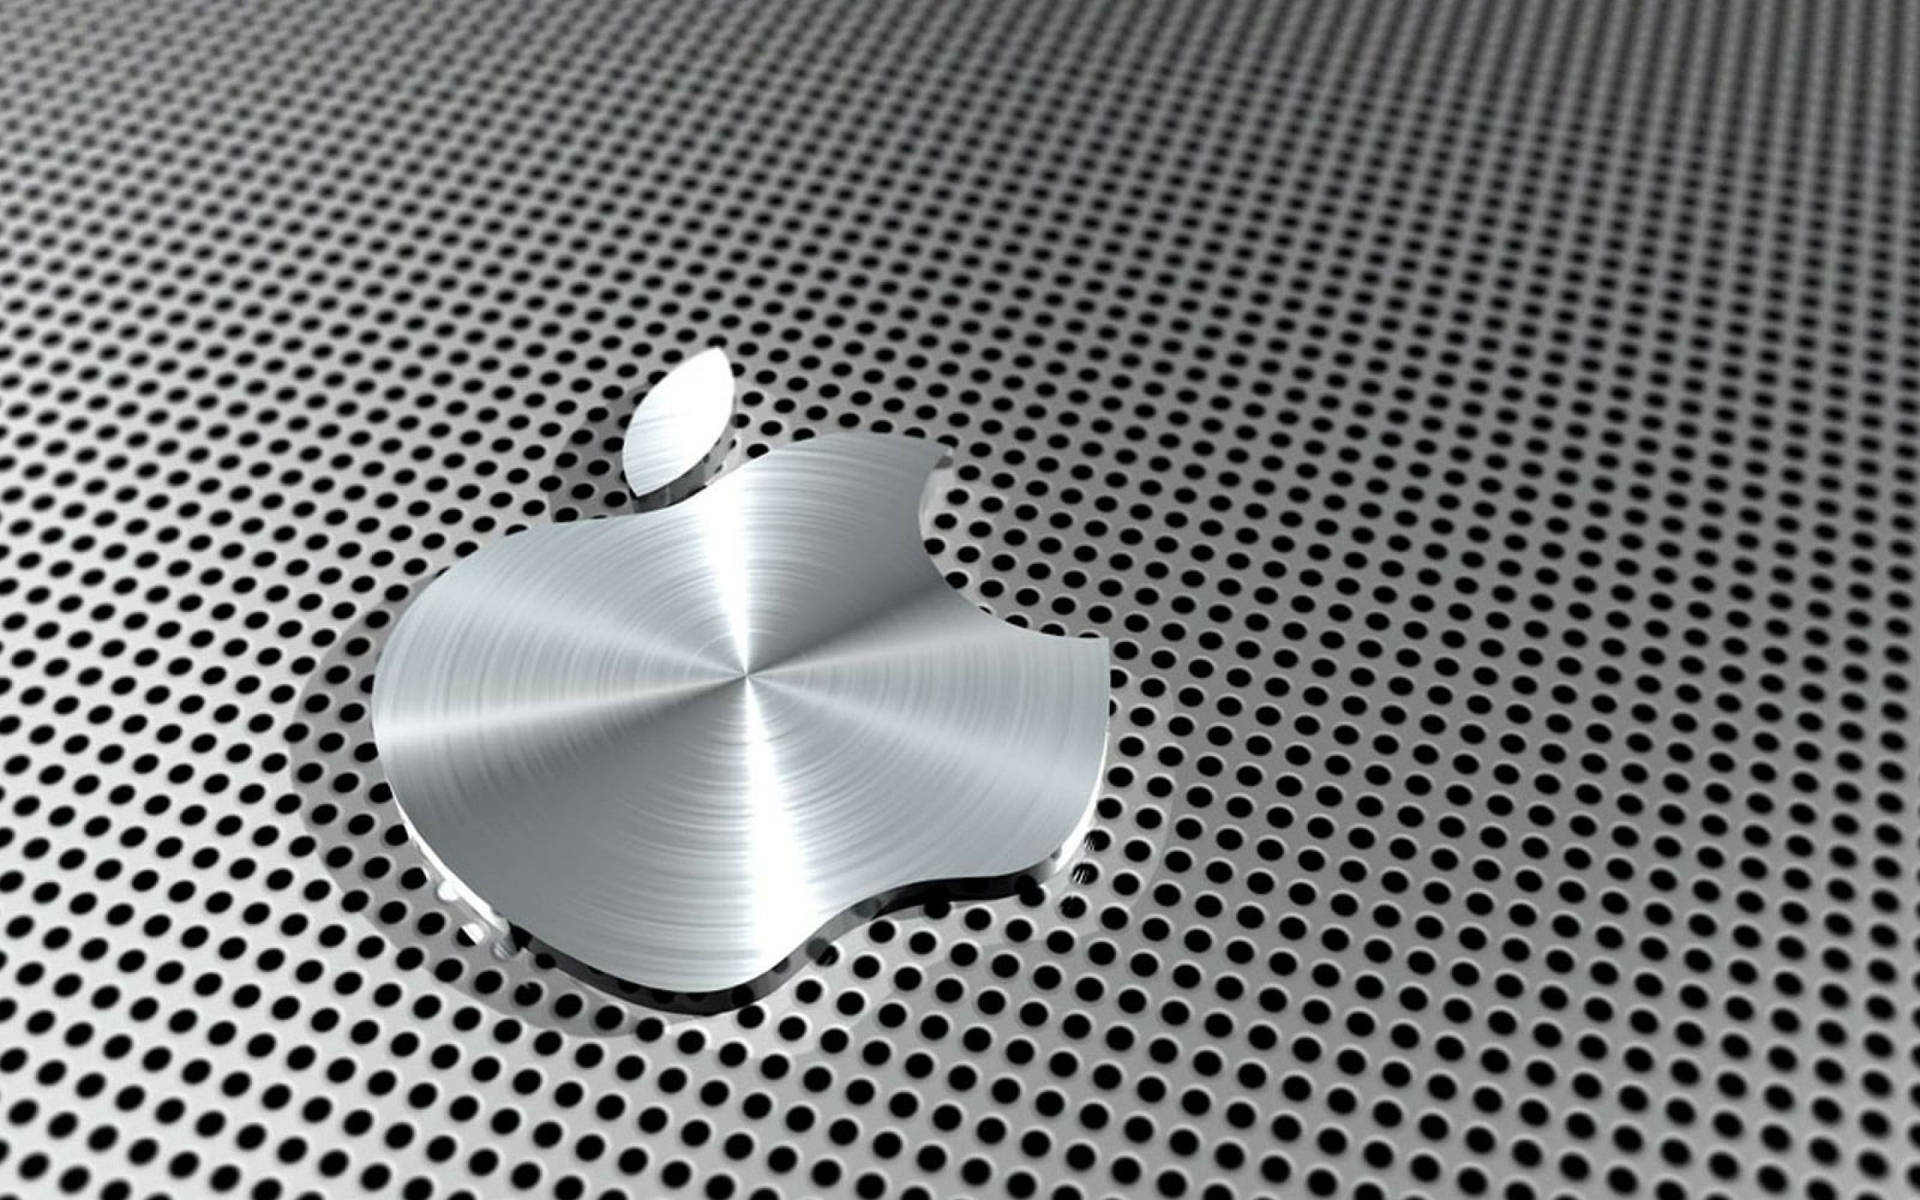 The Majestic Full Hd Silver Apple Emblem On Perforated Steel Background